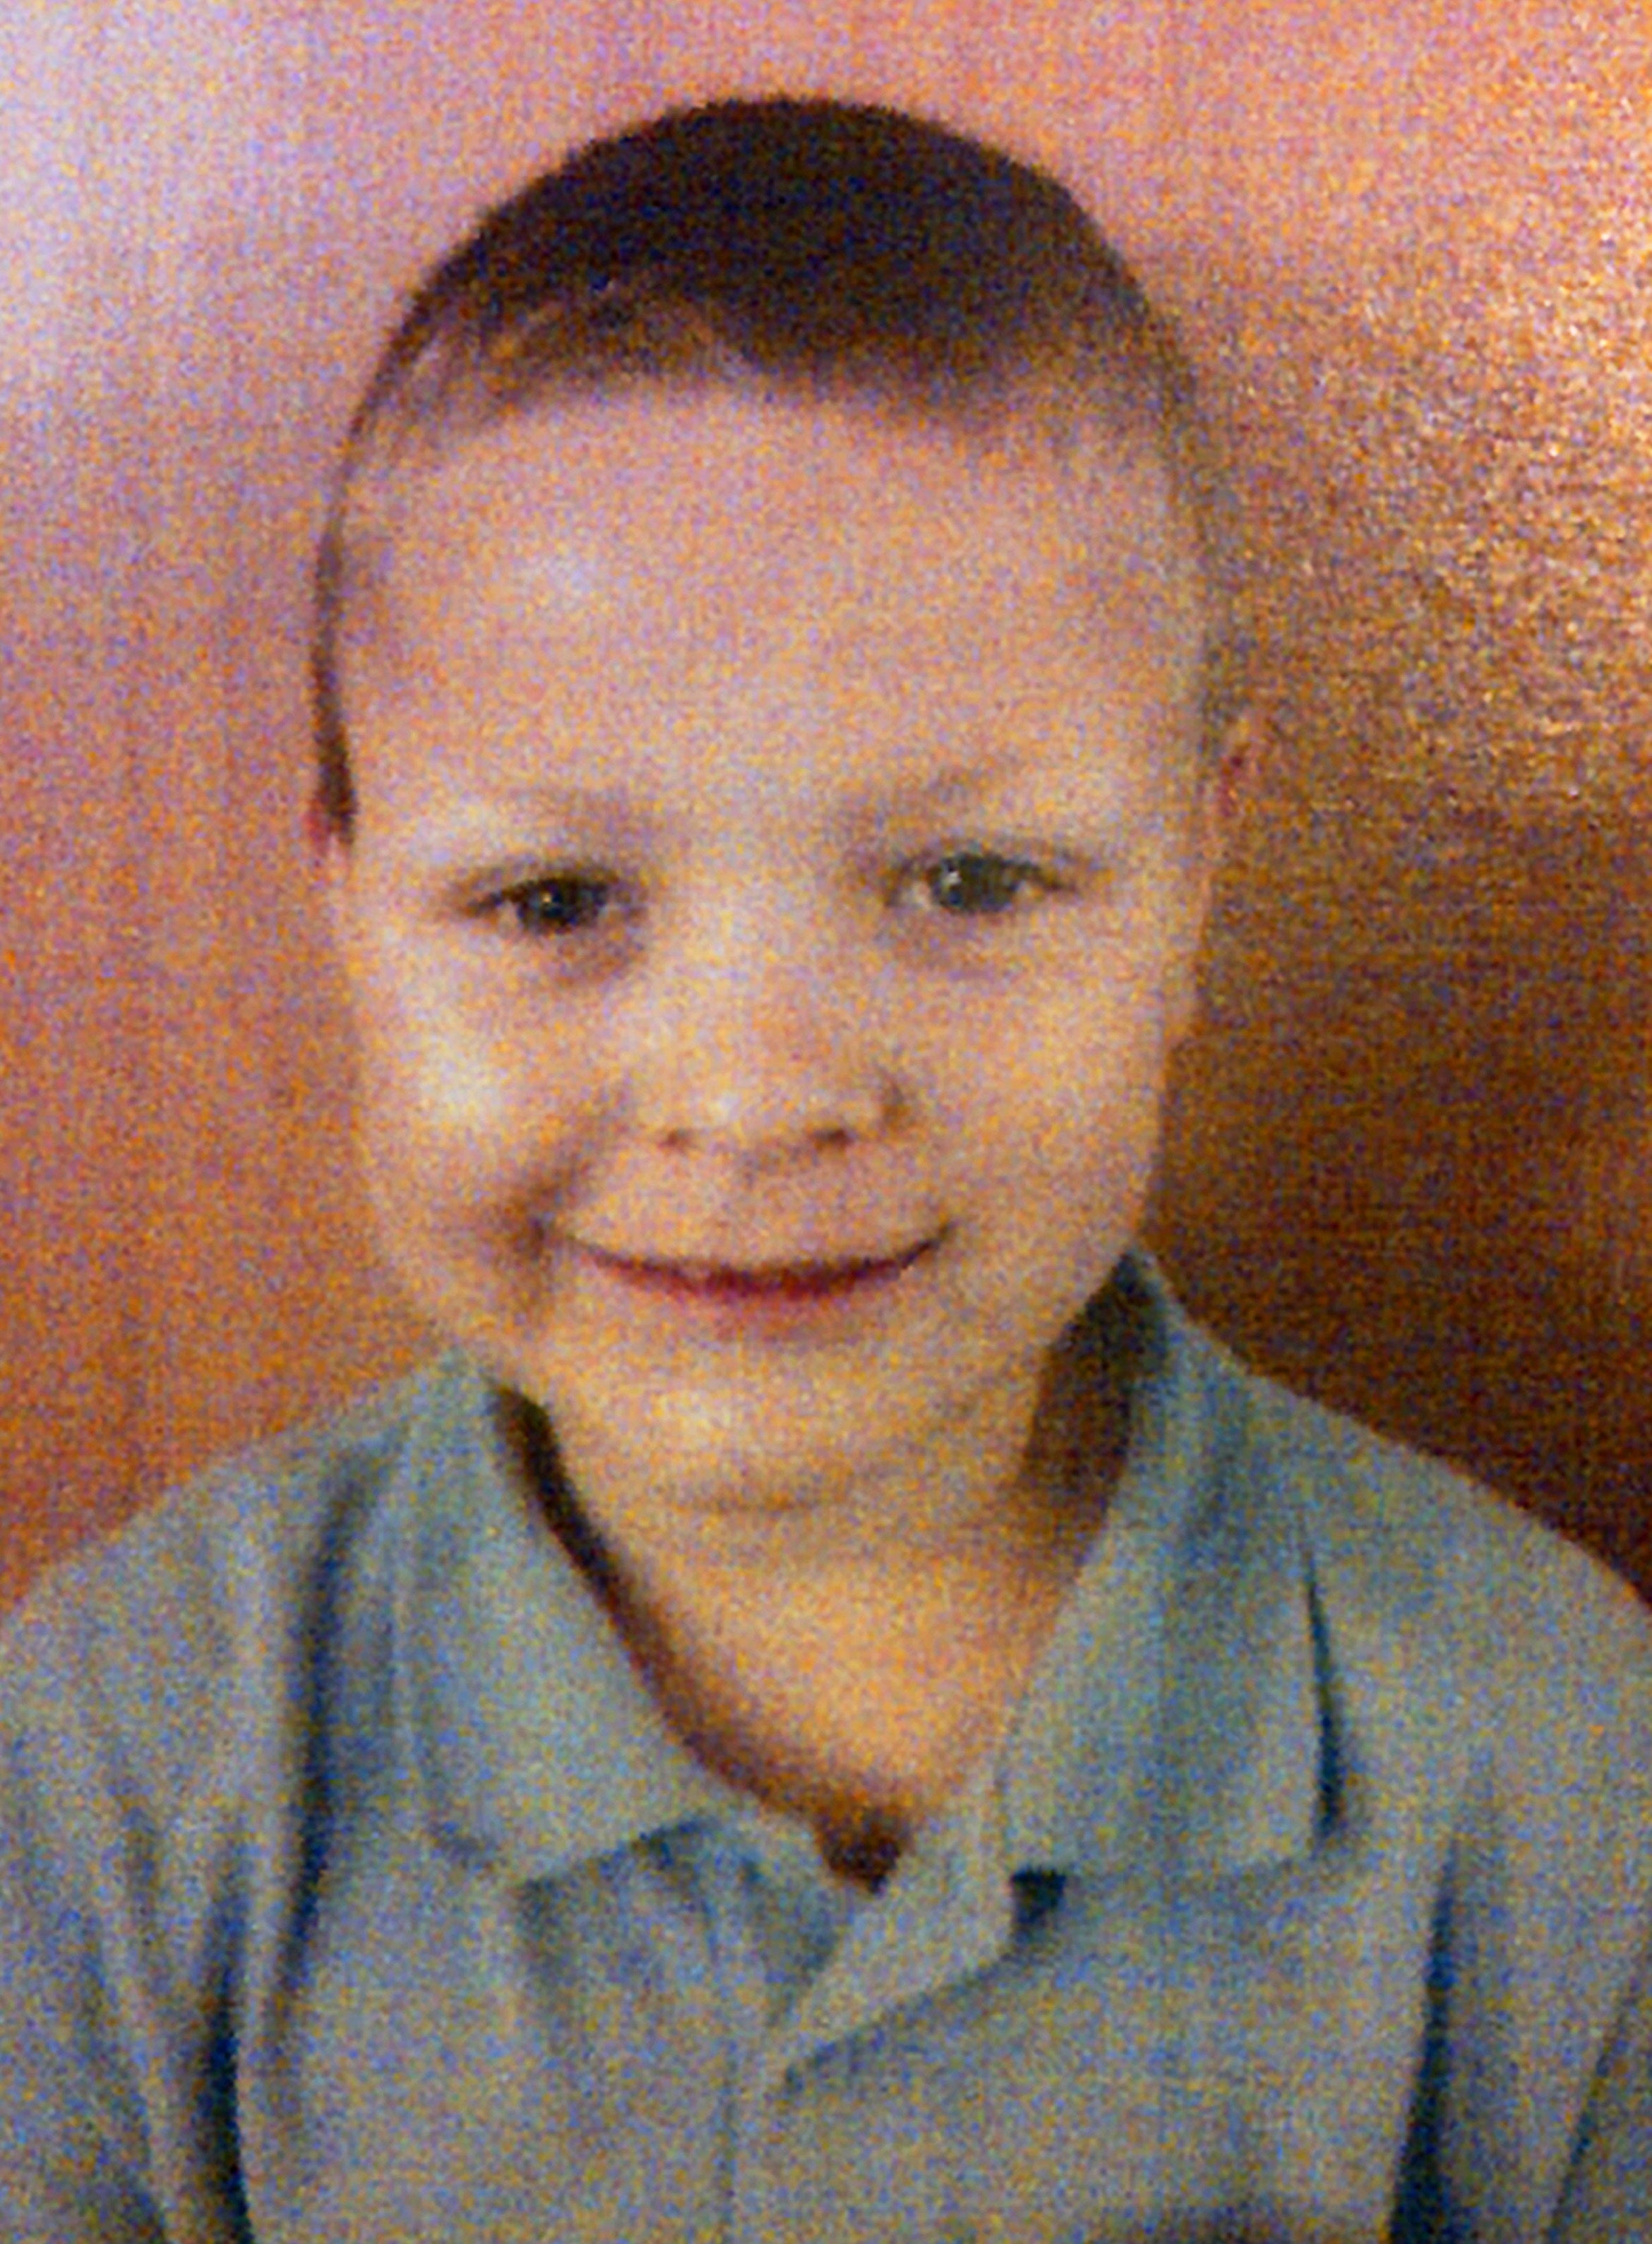 Conley Thompson went missing after telling his mother he was going out to play with friends in Barnsley, South York